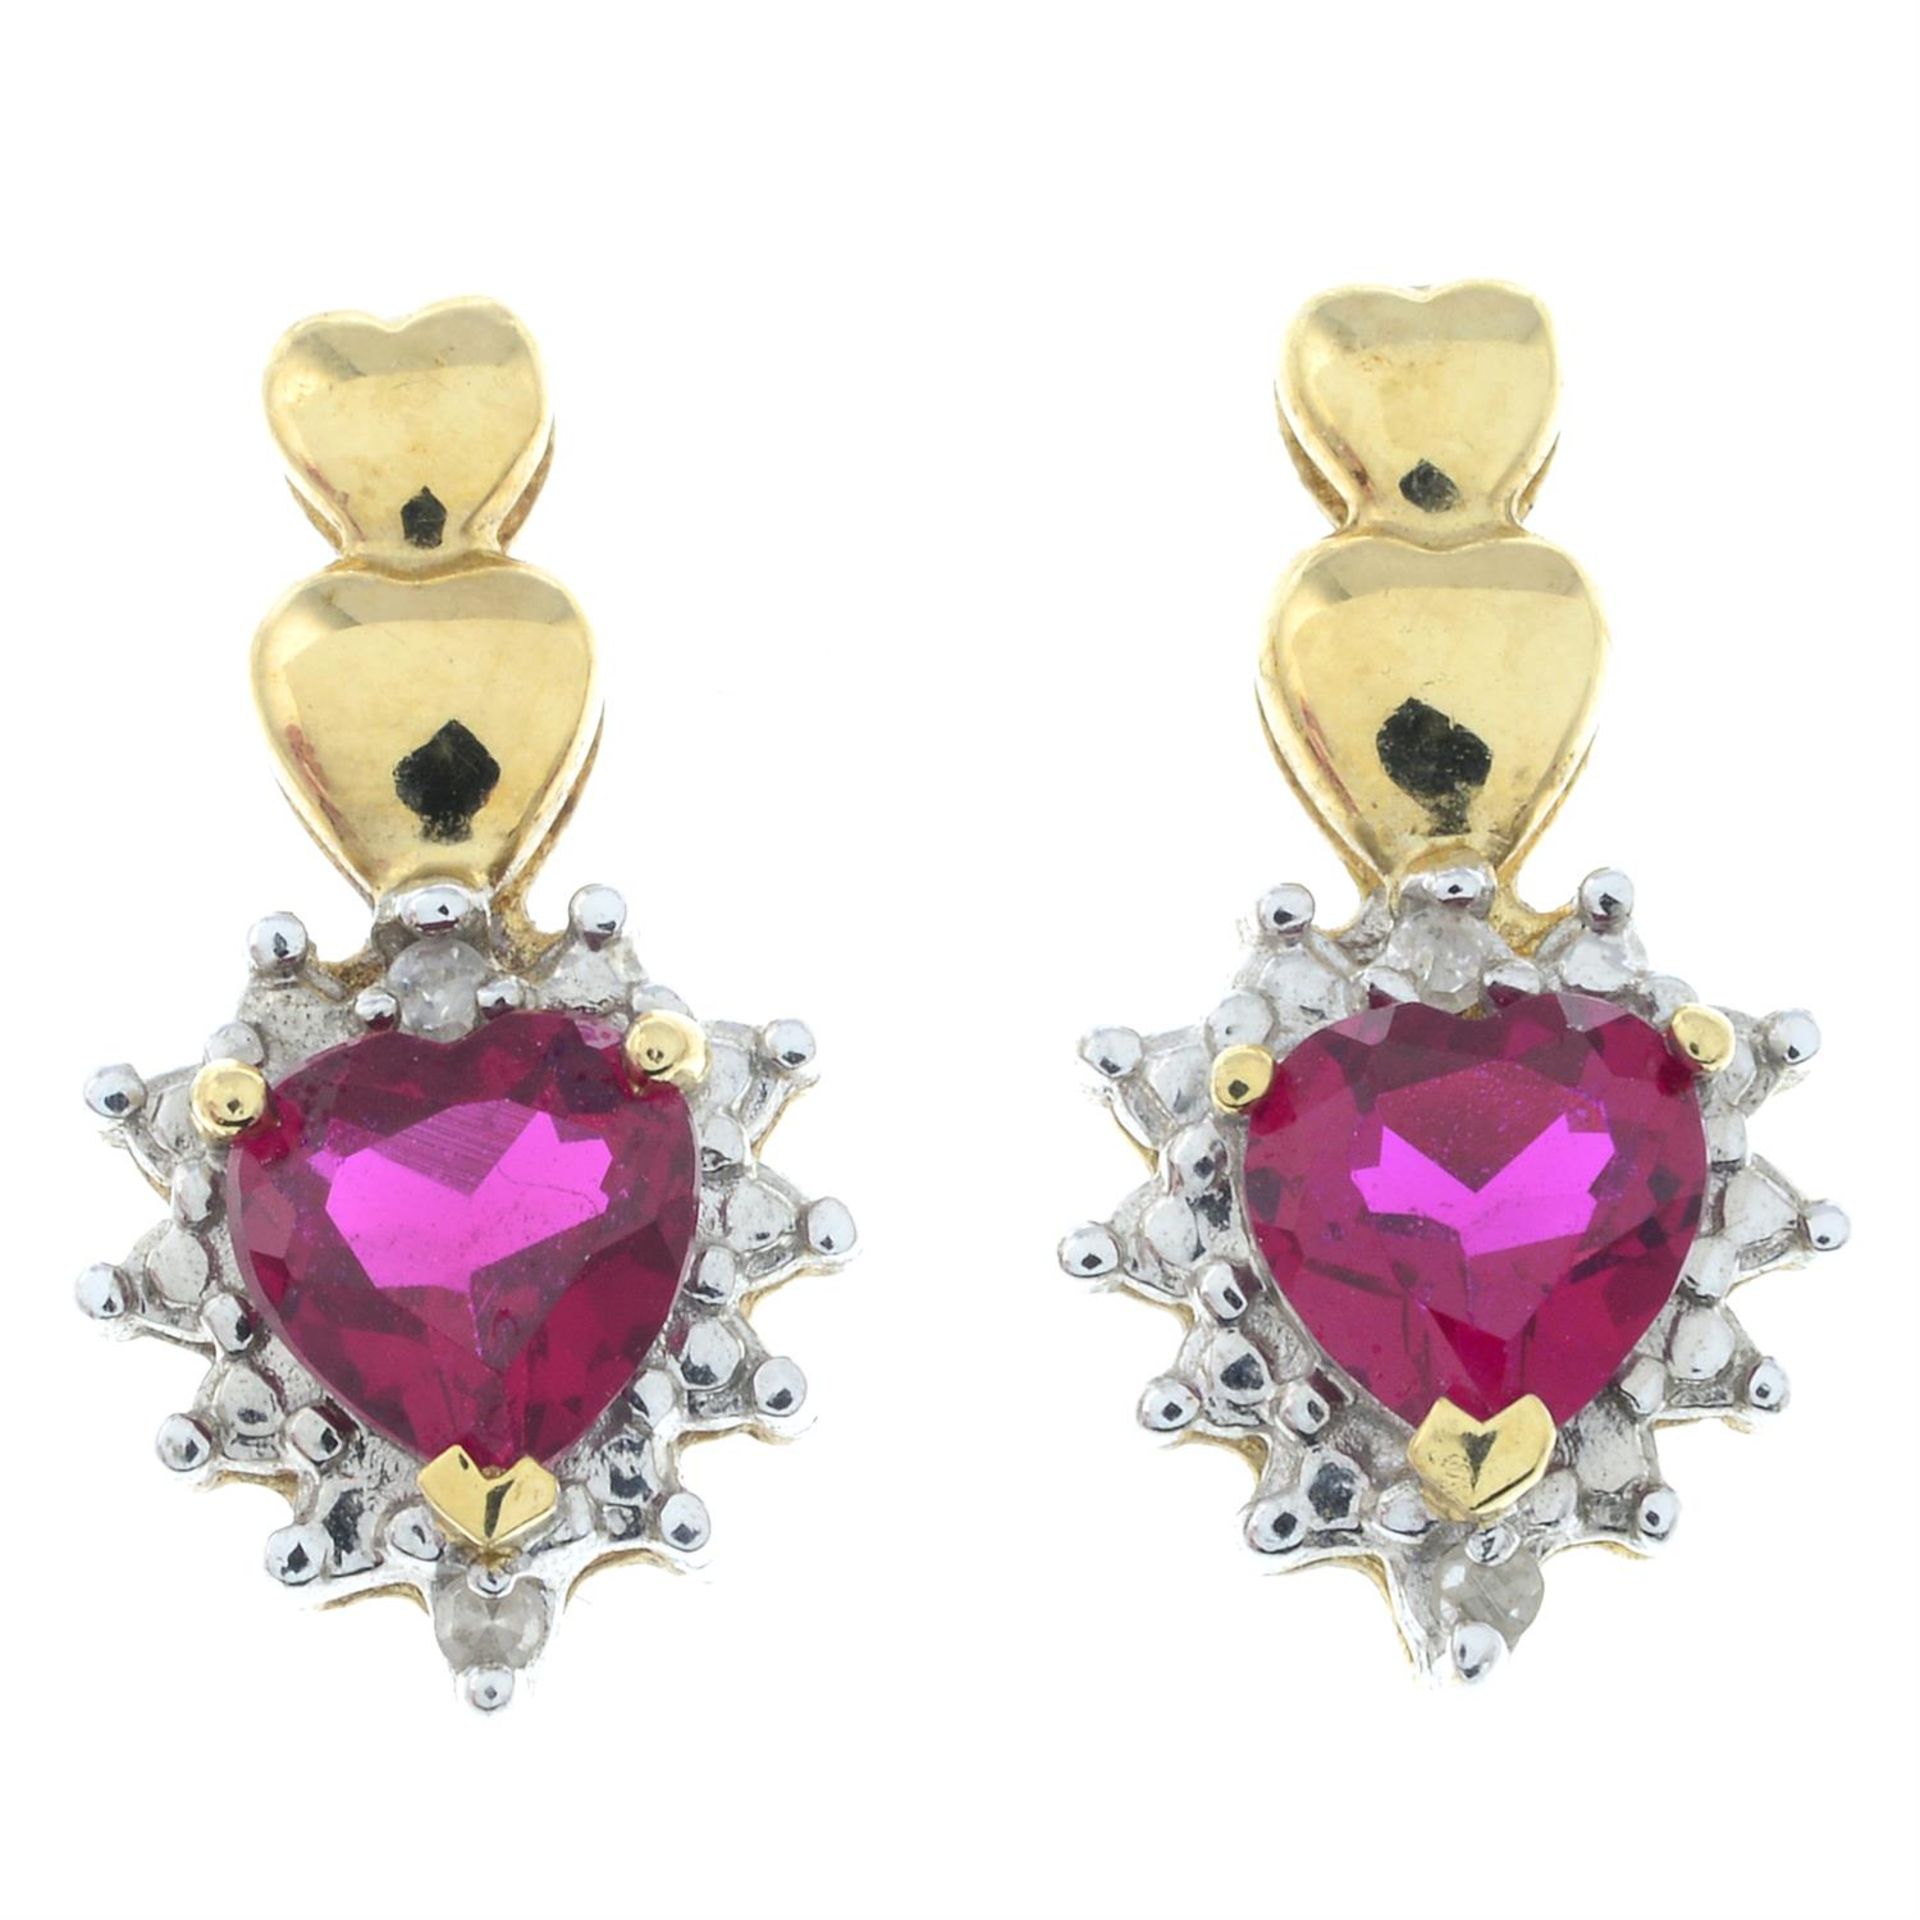 A pair of 9ct gold, synthetic ruby and diamond earrings.